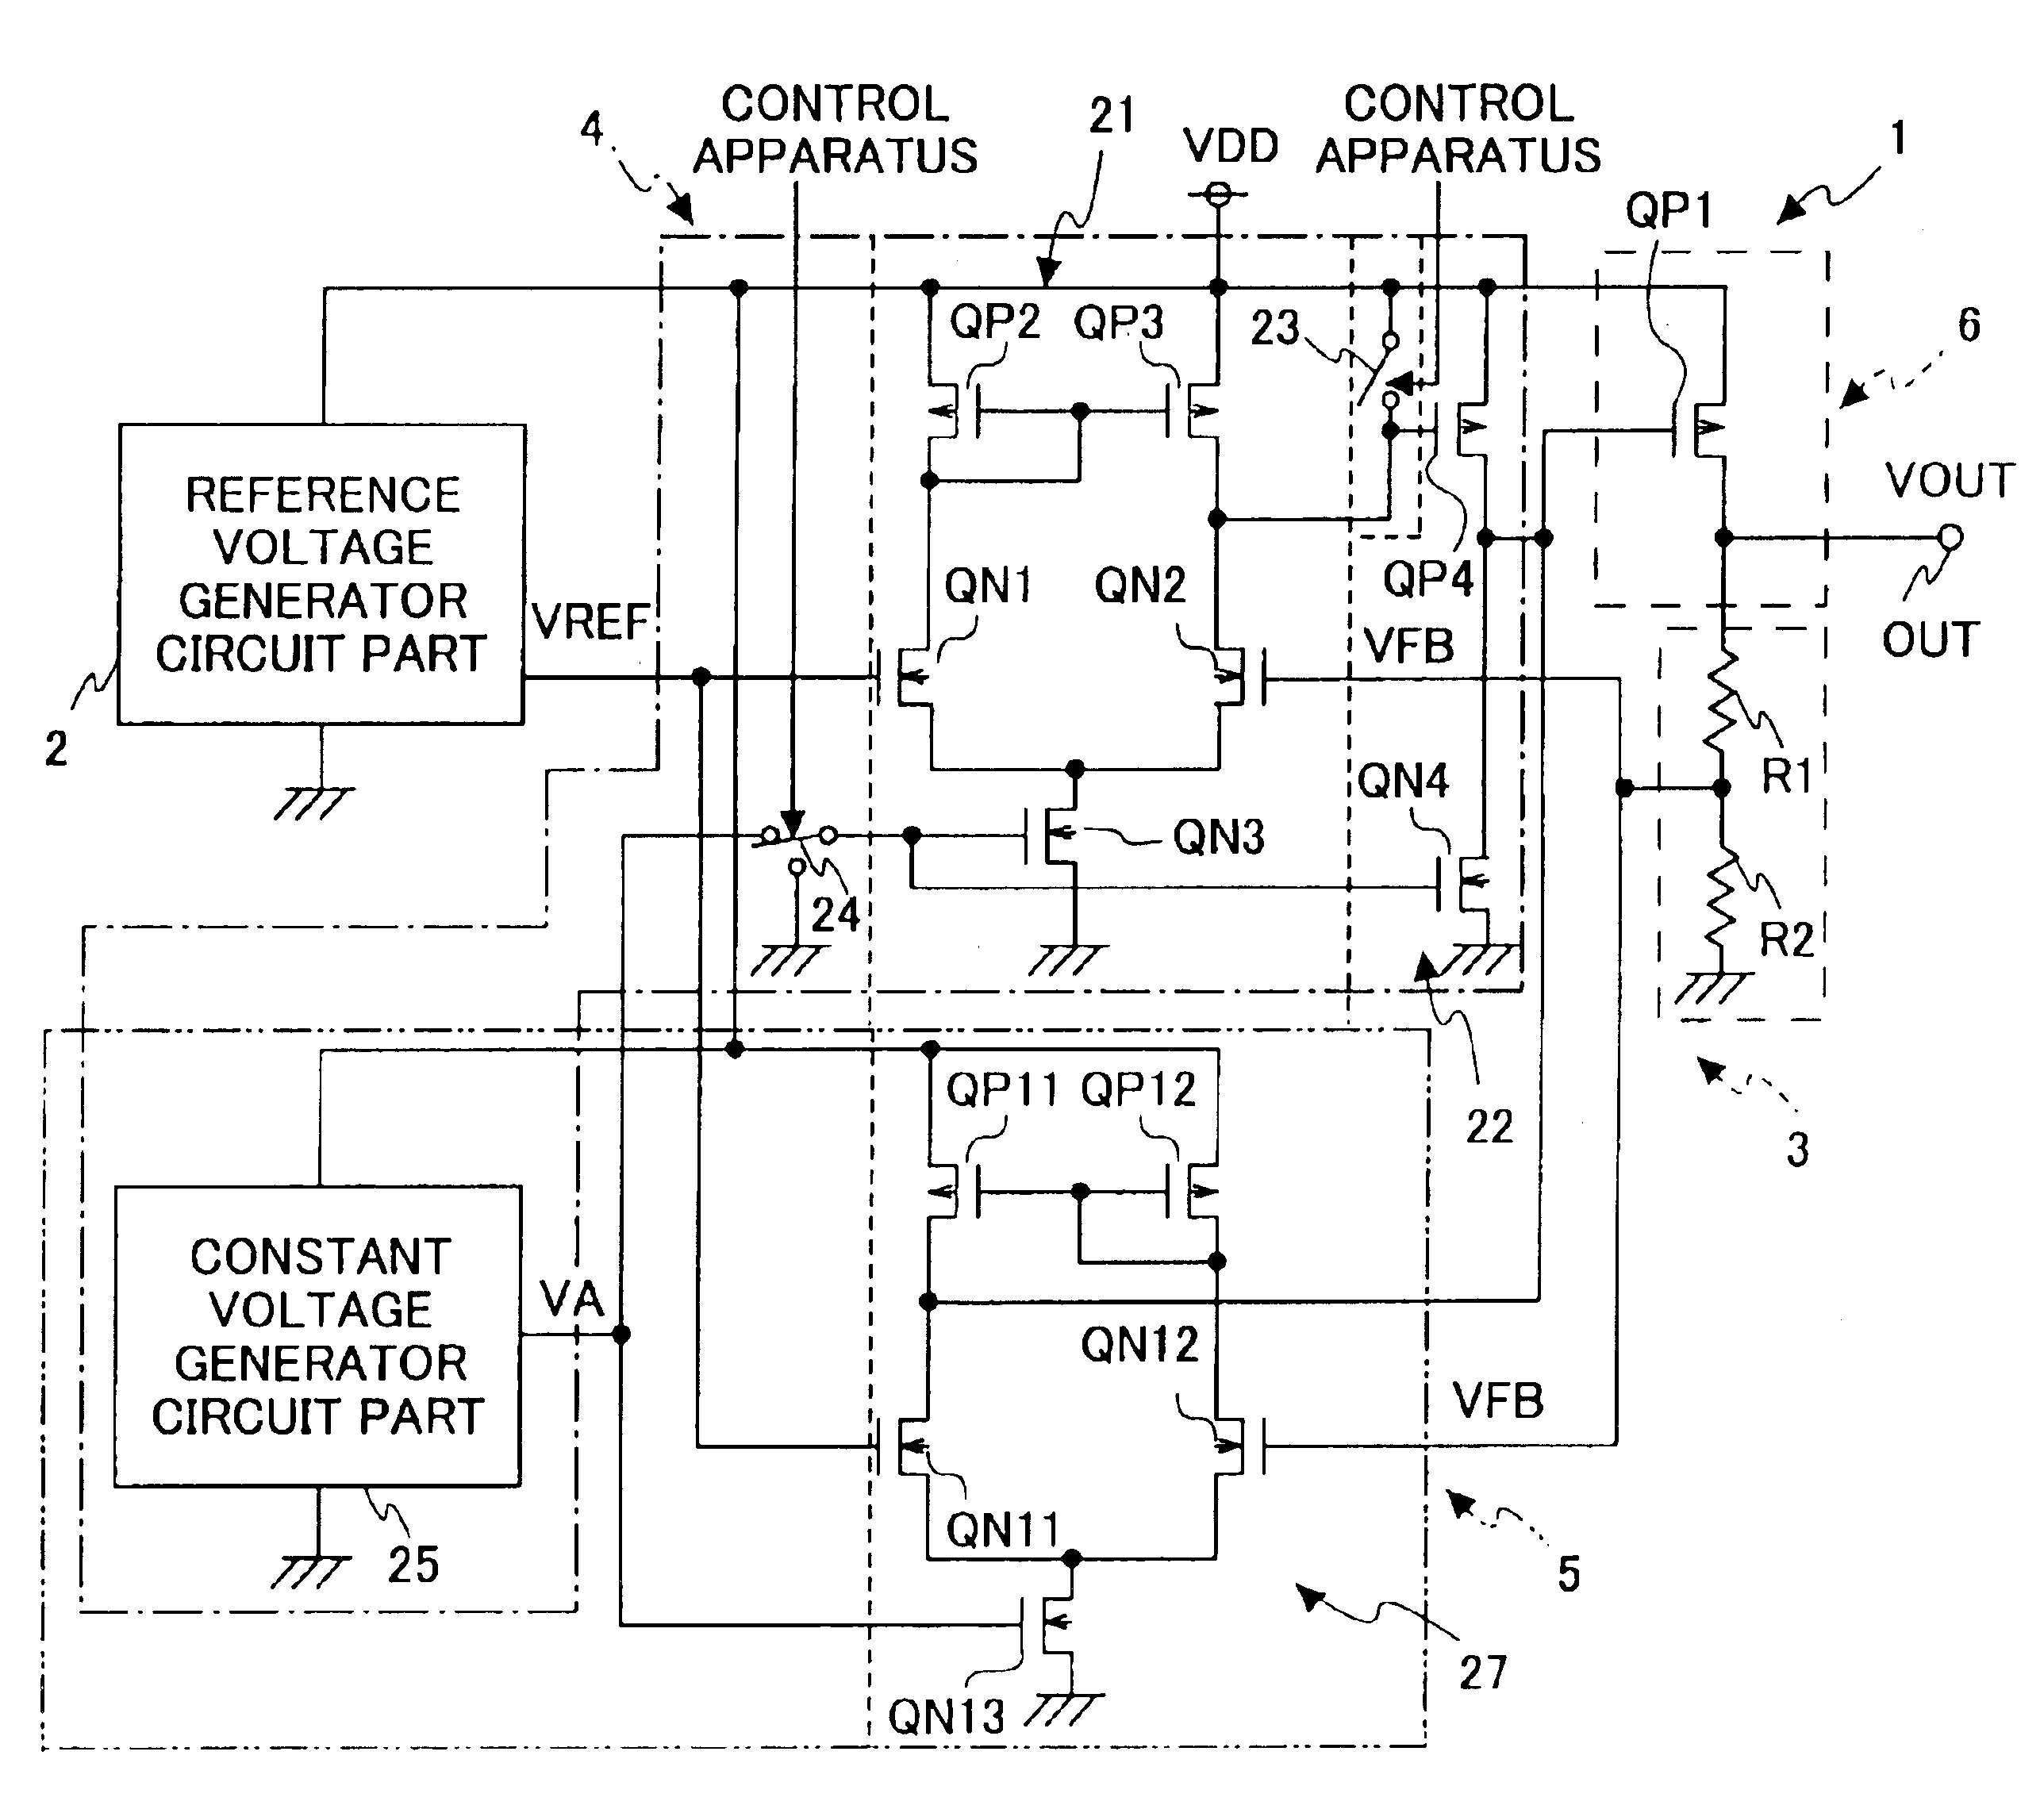 Voltage regulator using two operational amplifiers in current consumption